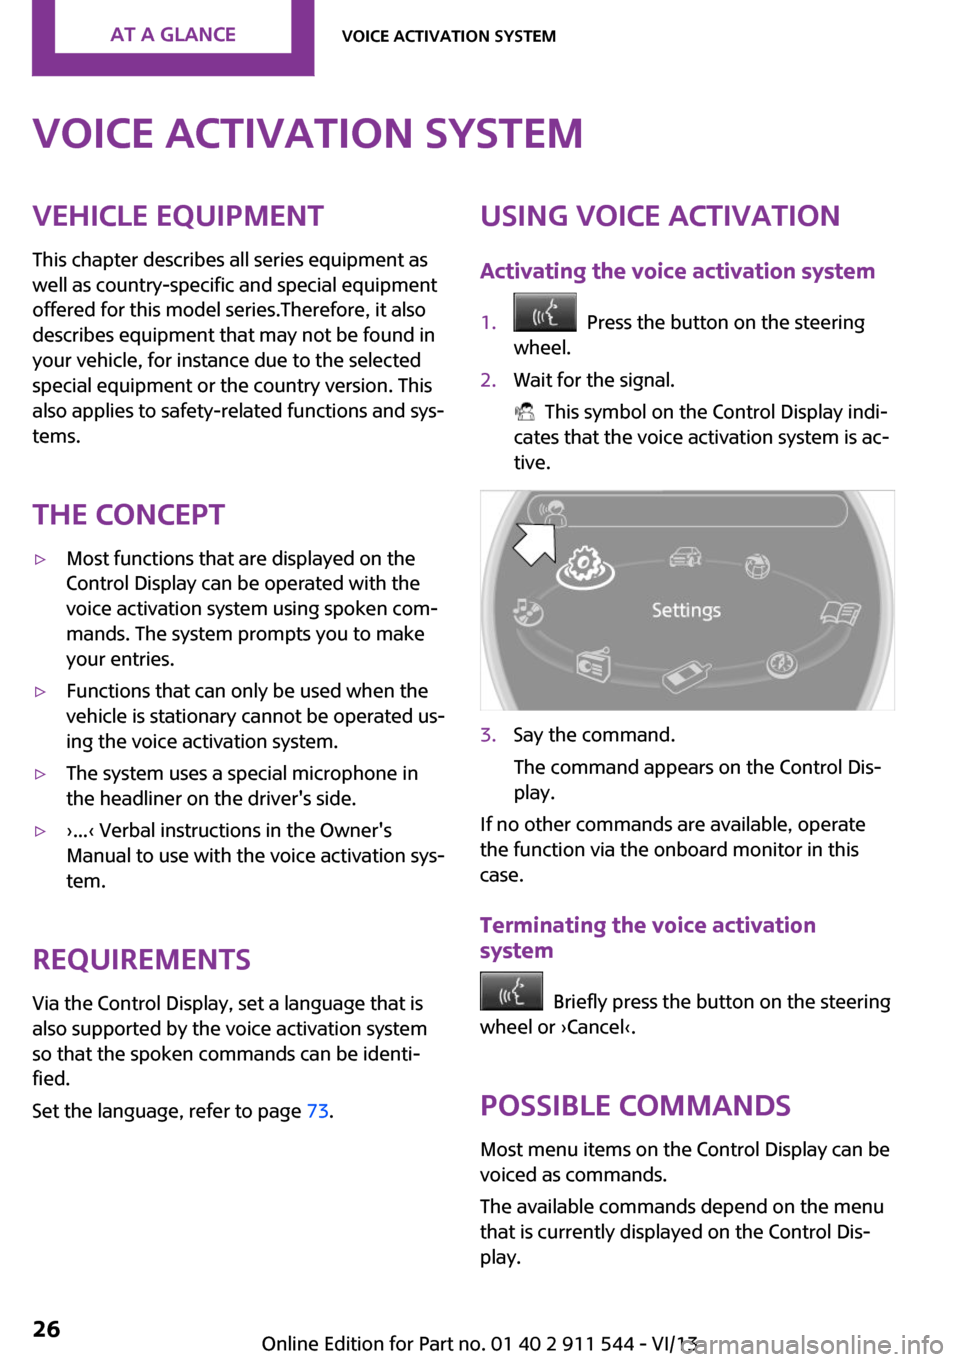 MINI Countryman 2014  Owners Manual (Mini Connected) Voice activation systemVehicle equipment
This chapter describes all series equipment as
well as country-specific and special equipment
offered for this model series.Therefore, it also
describes equipm